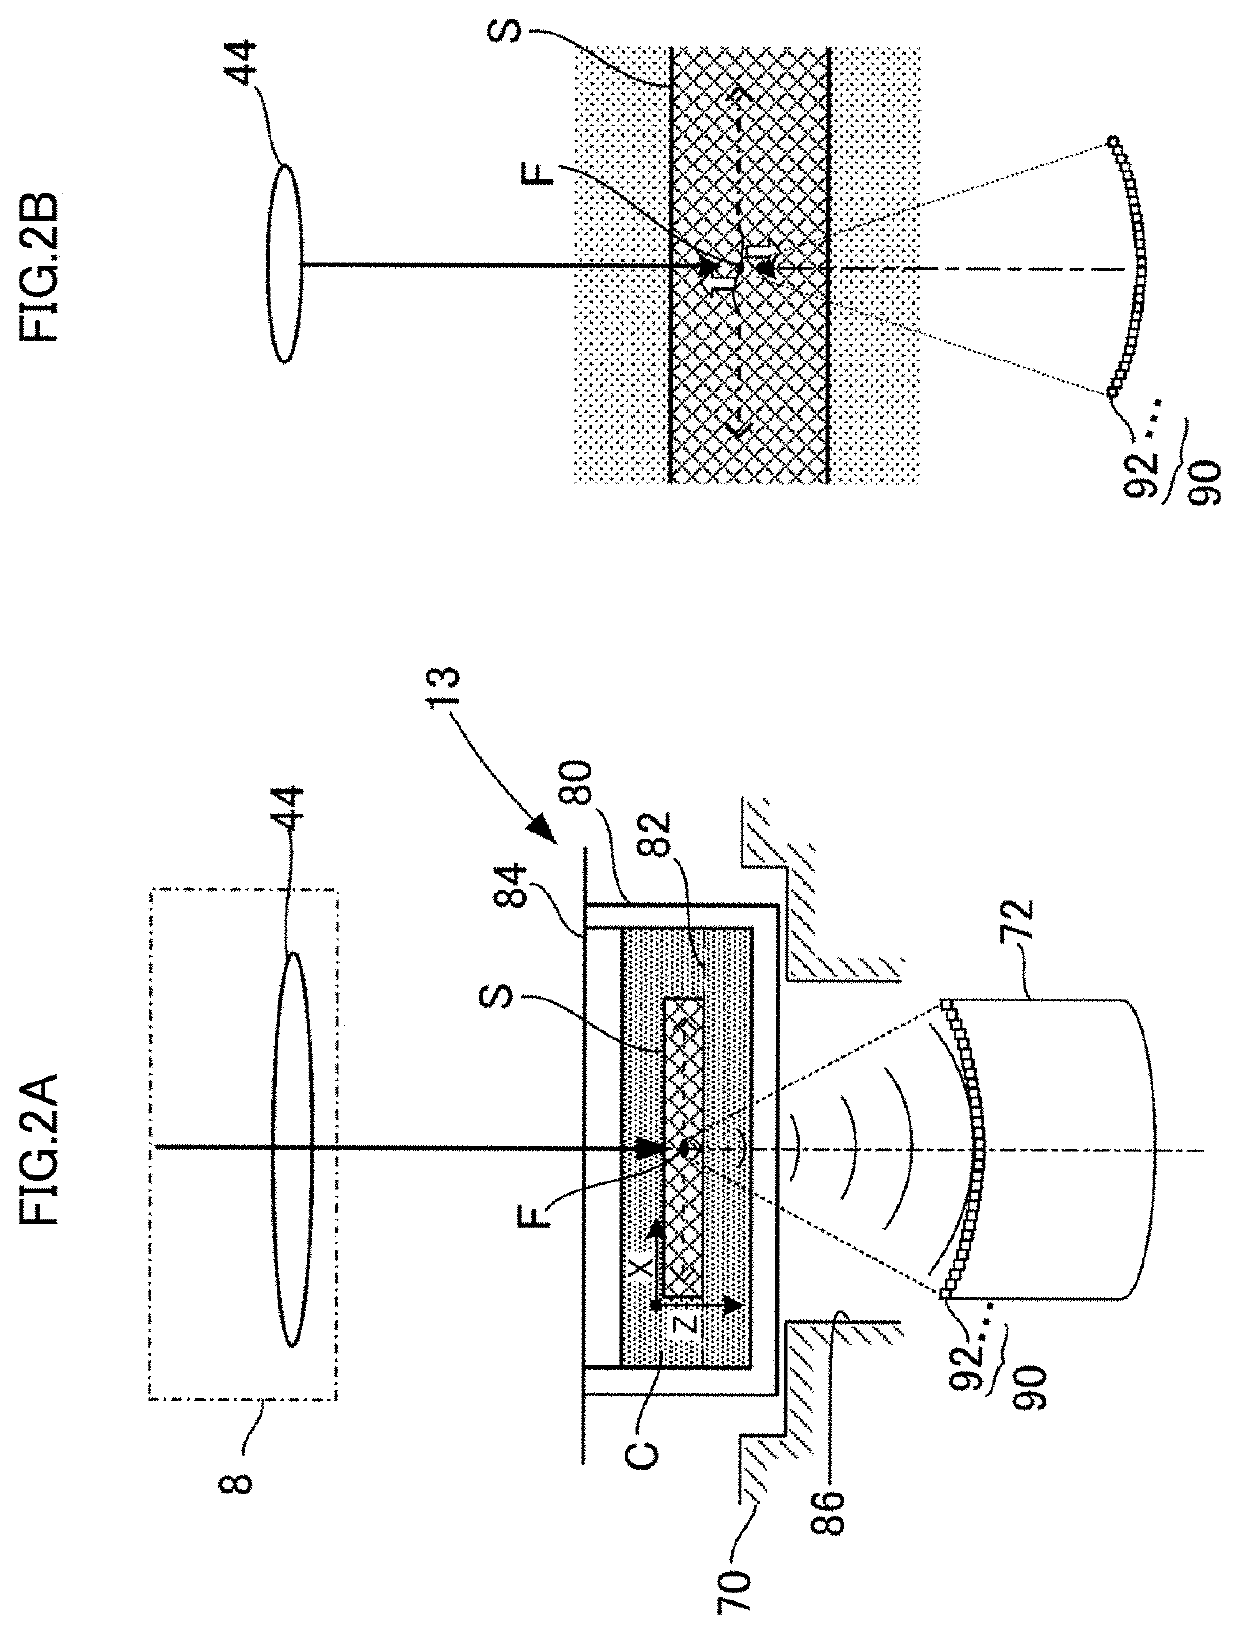 Device and method for tomographically visualizing viscoelasticity of tissue